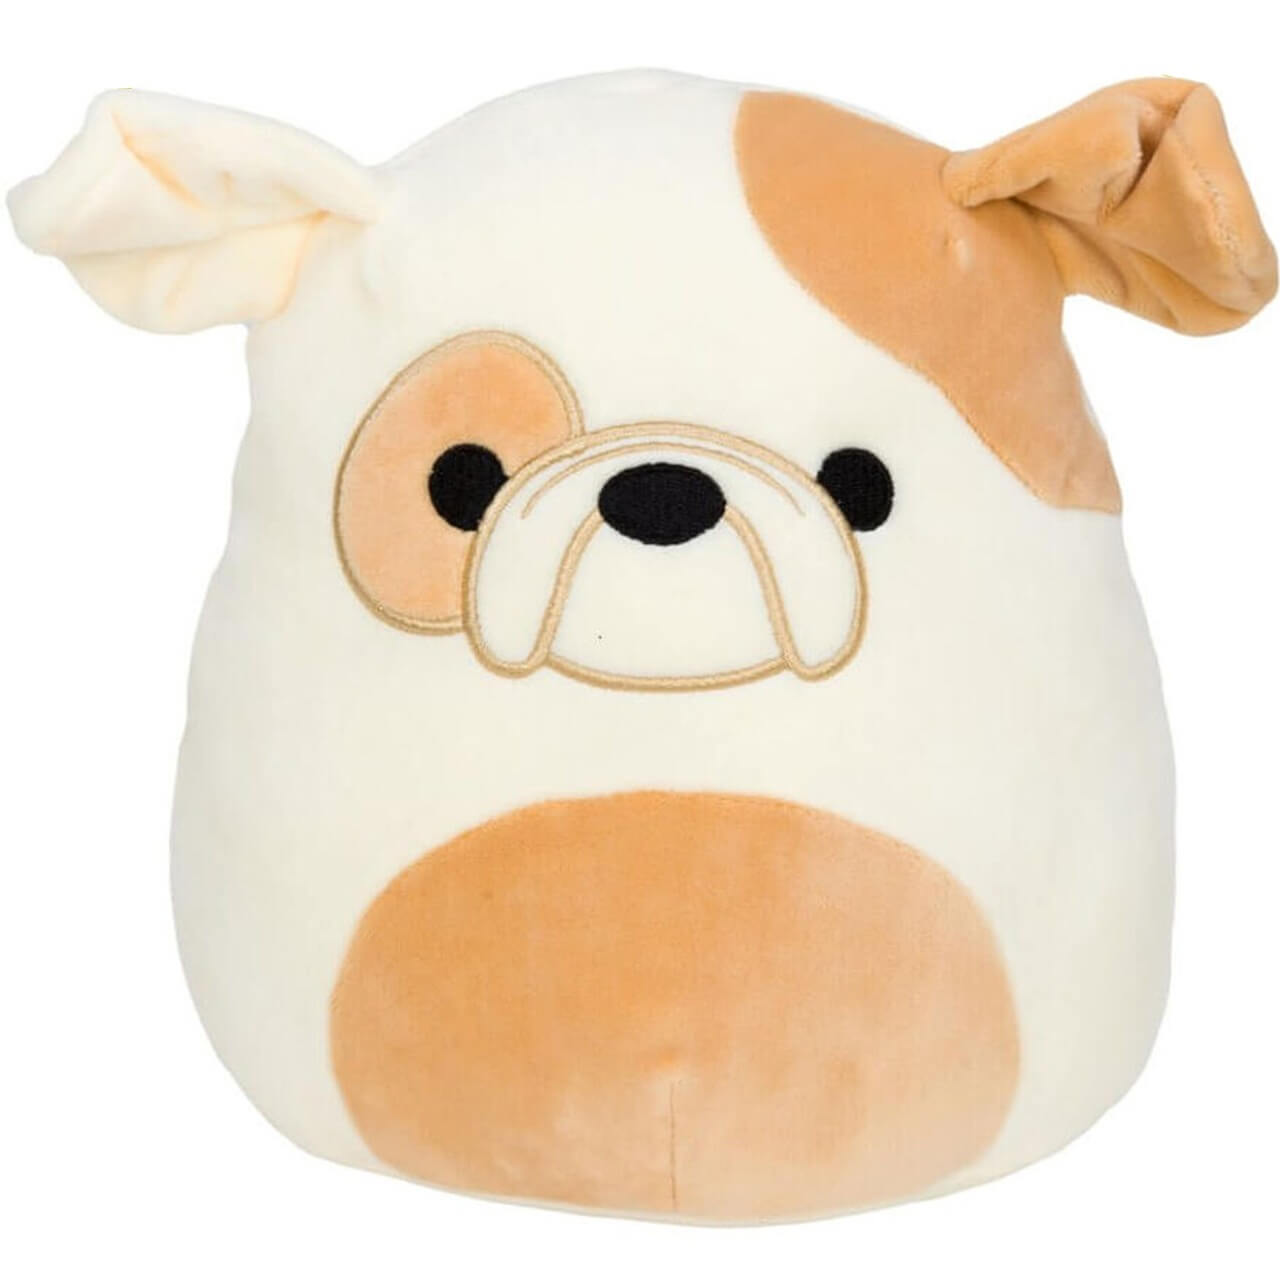 Can Squishmallows Help With Depression? - HealthNord